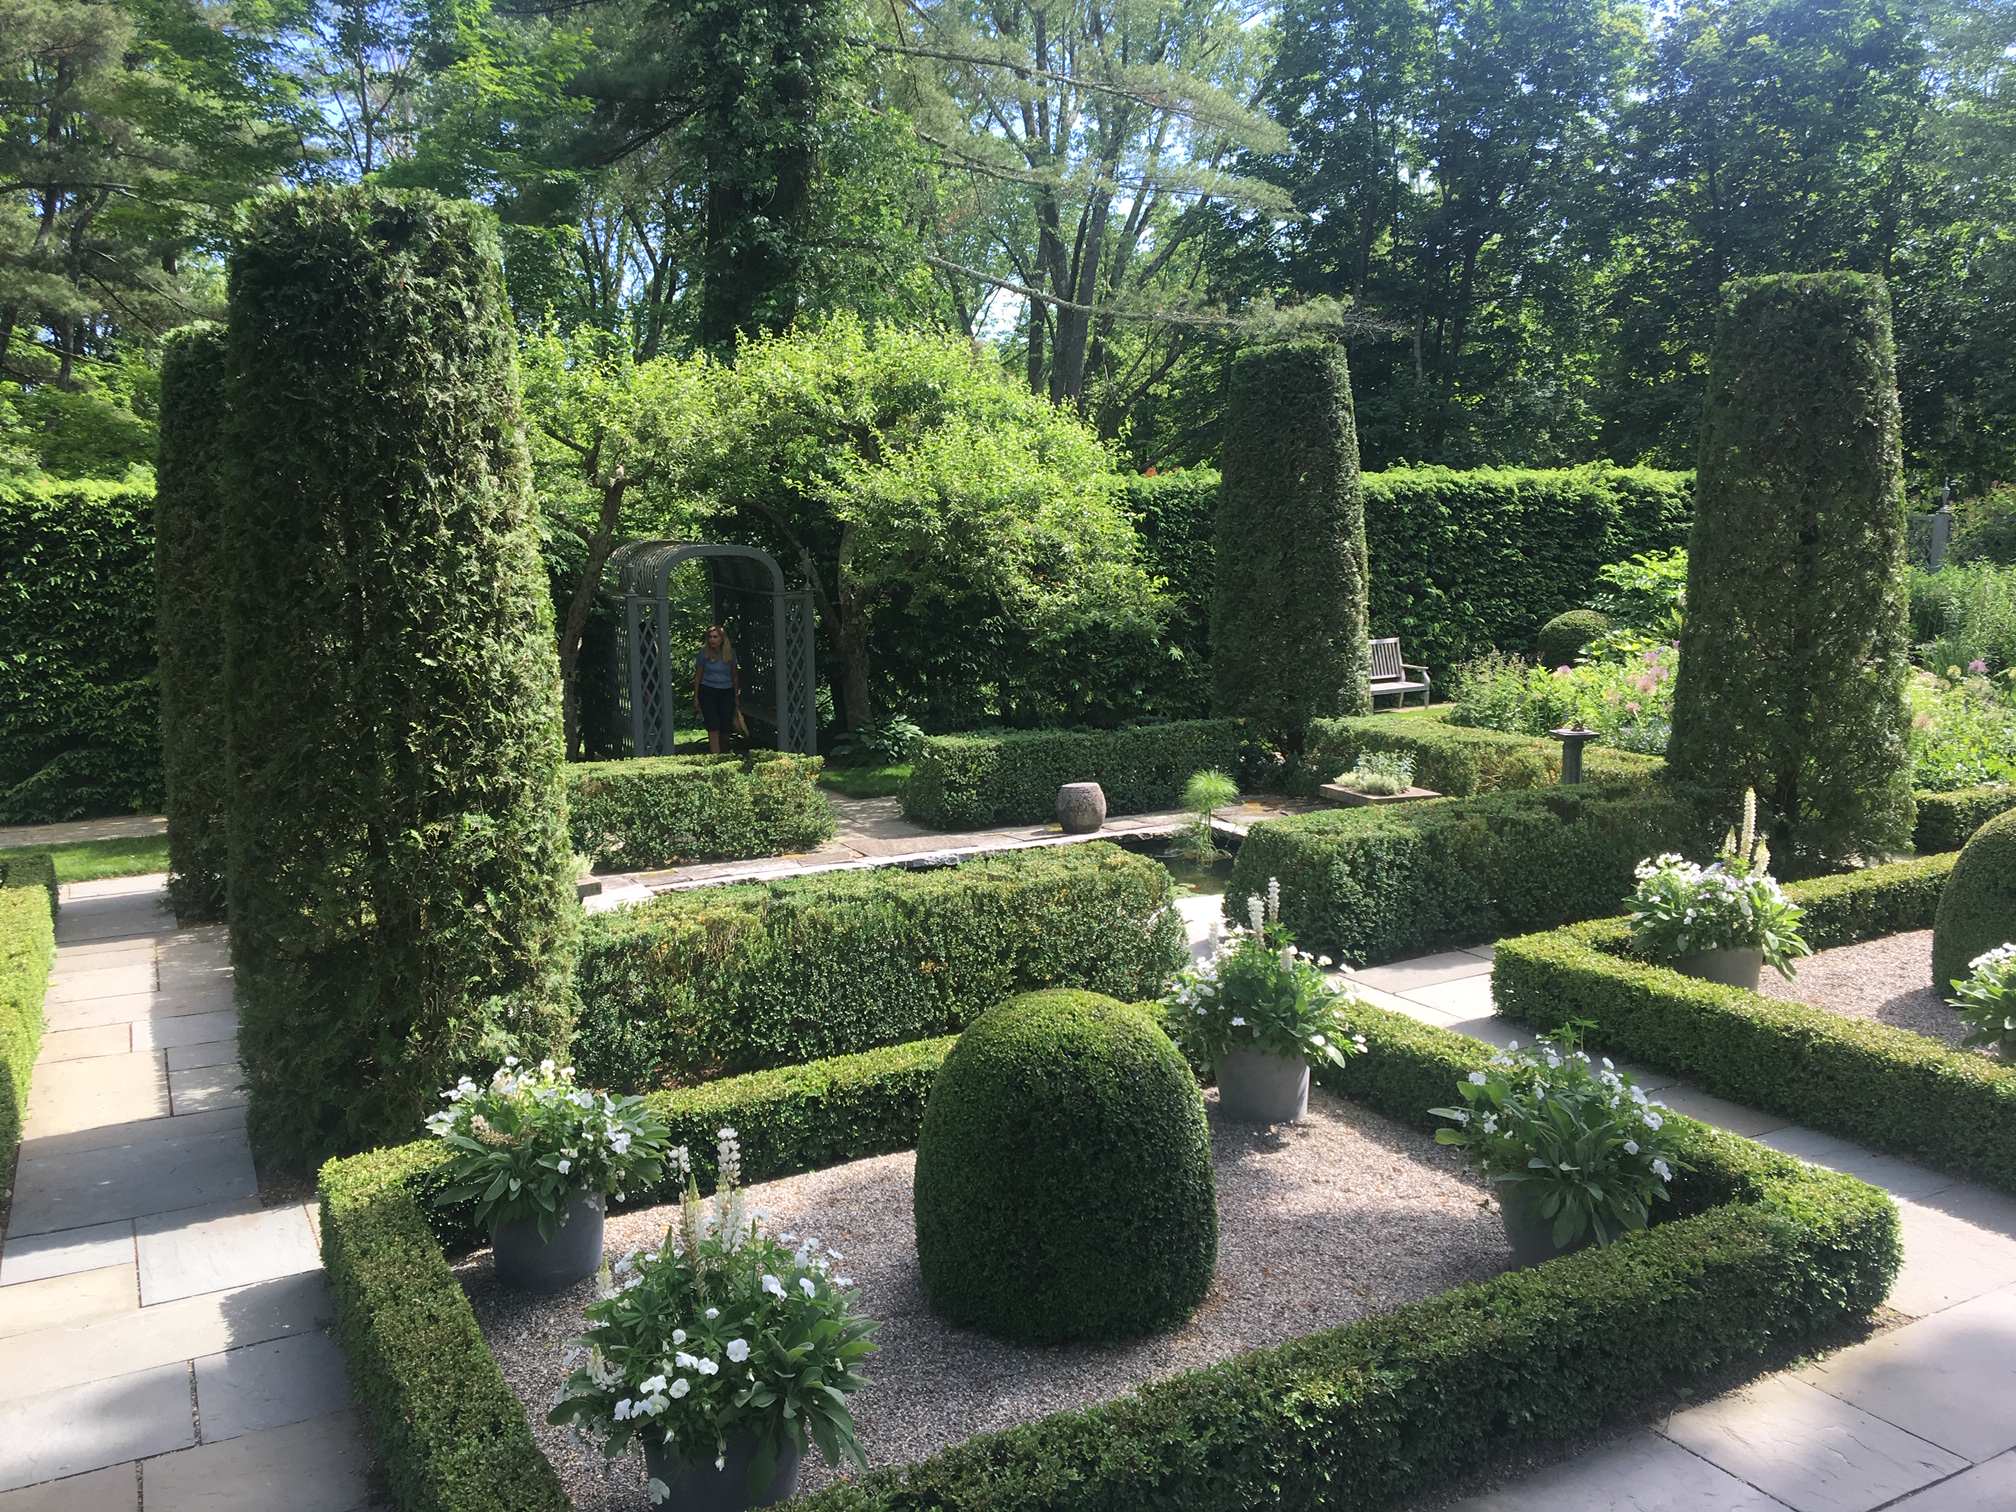 Formal Boxwood Gardens, Arborvitae sheered trees and  flower beds all planted with white. The inside of the beds is pea gravel and whistera is above the lady in the archway. Private Garden. Photo by P